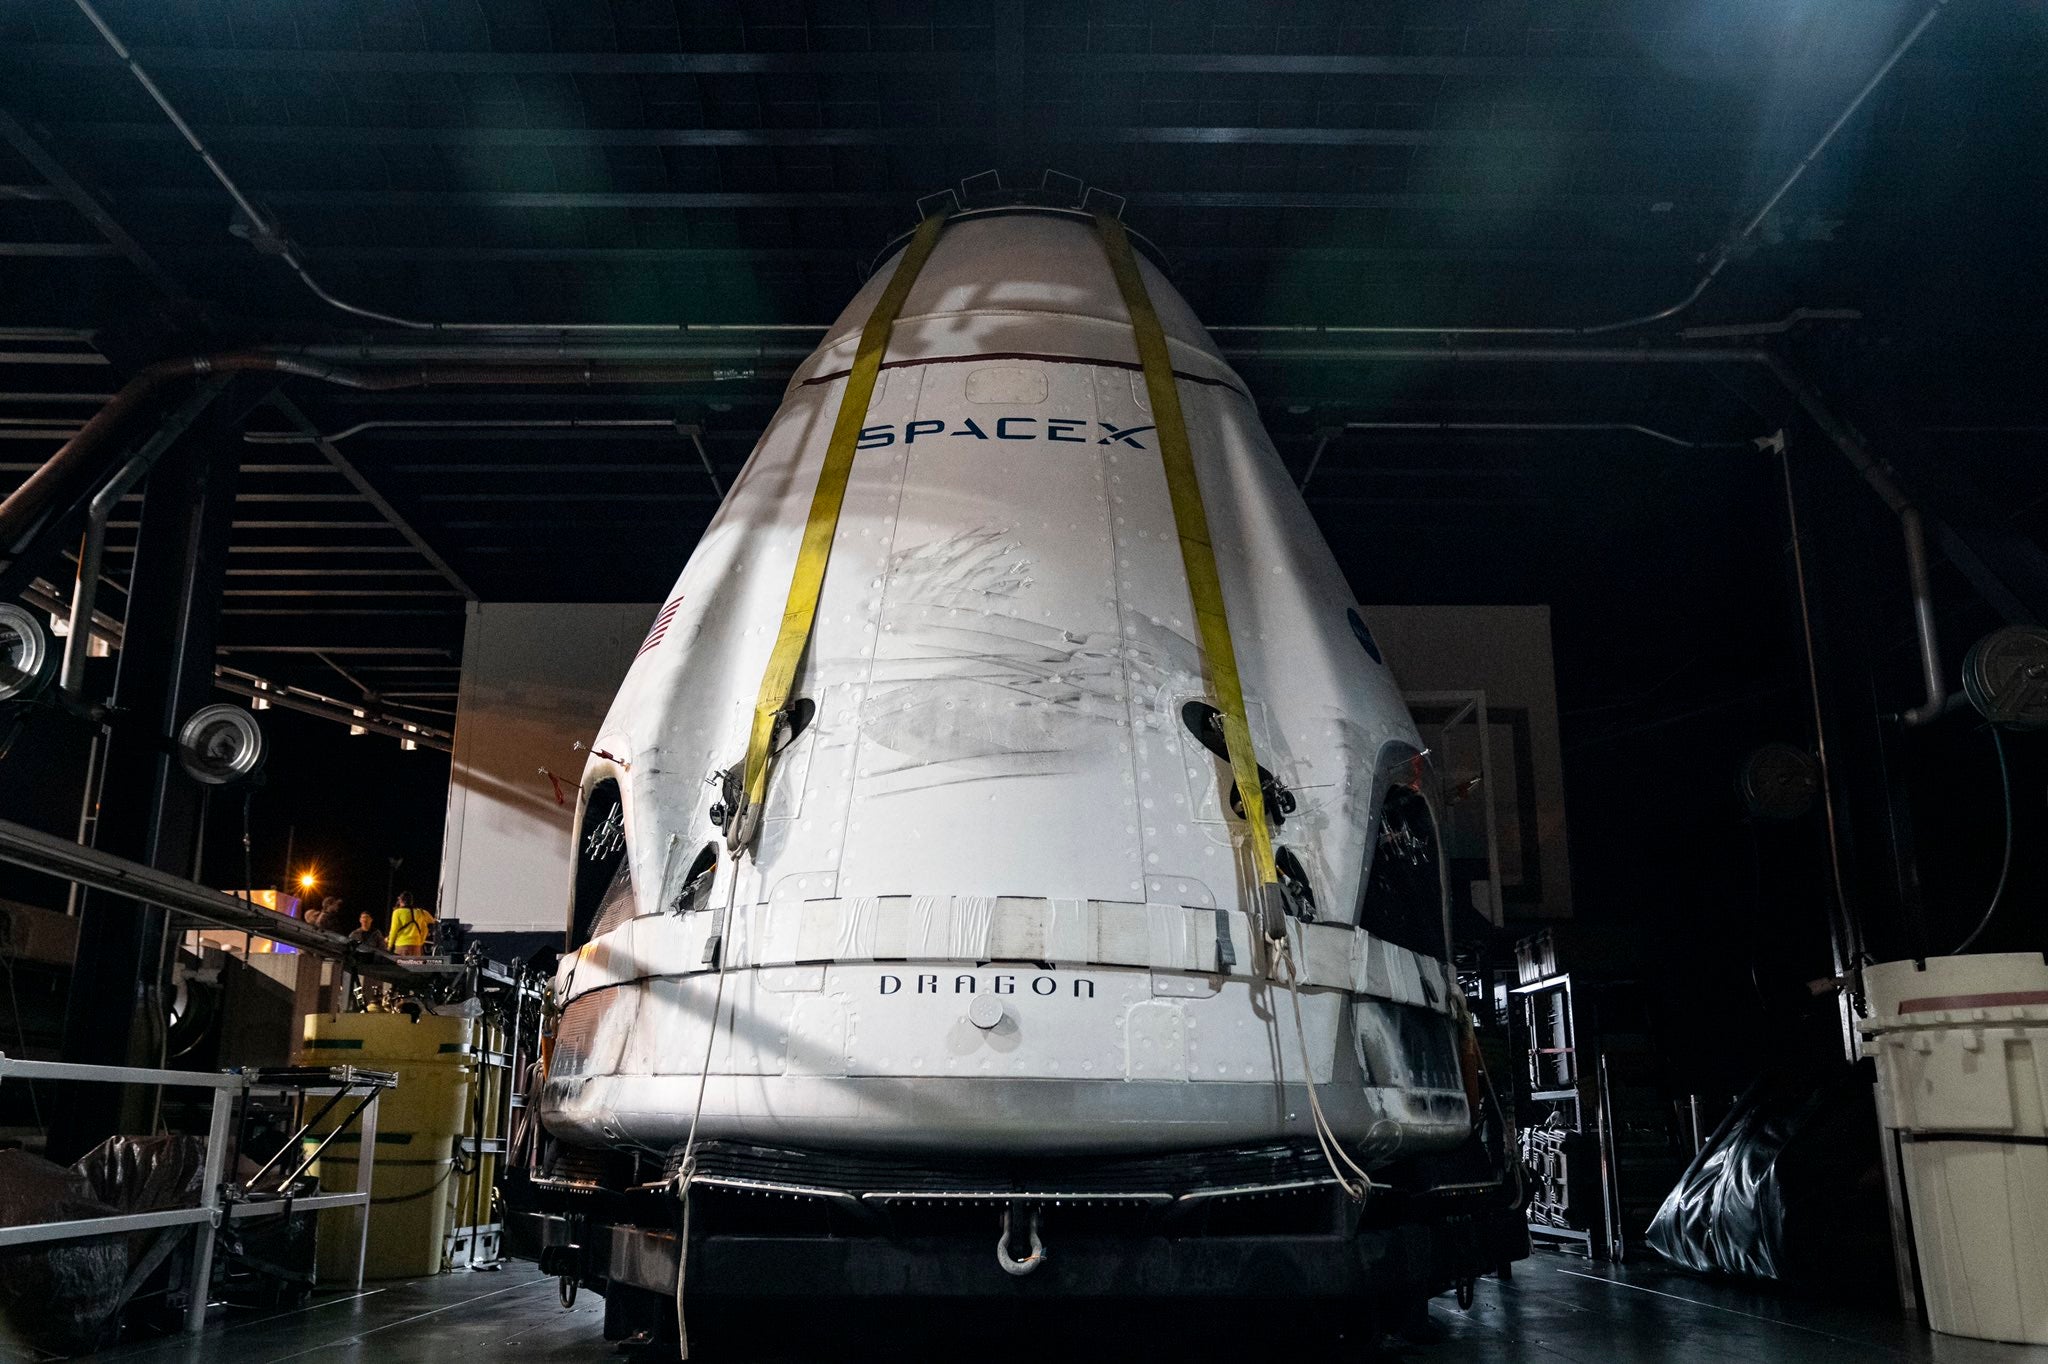 SpaceX worked in coordination with U.S Air Force to recover the Crew Dragon spacecraft after successful In-Flight Abort mission